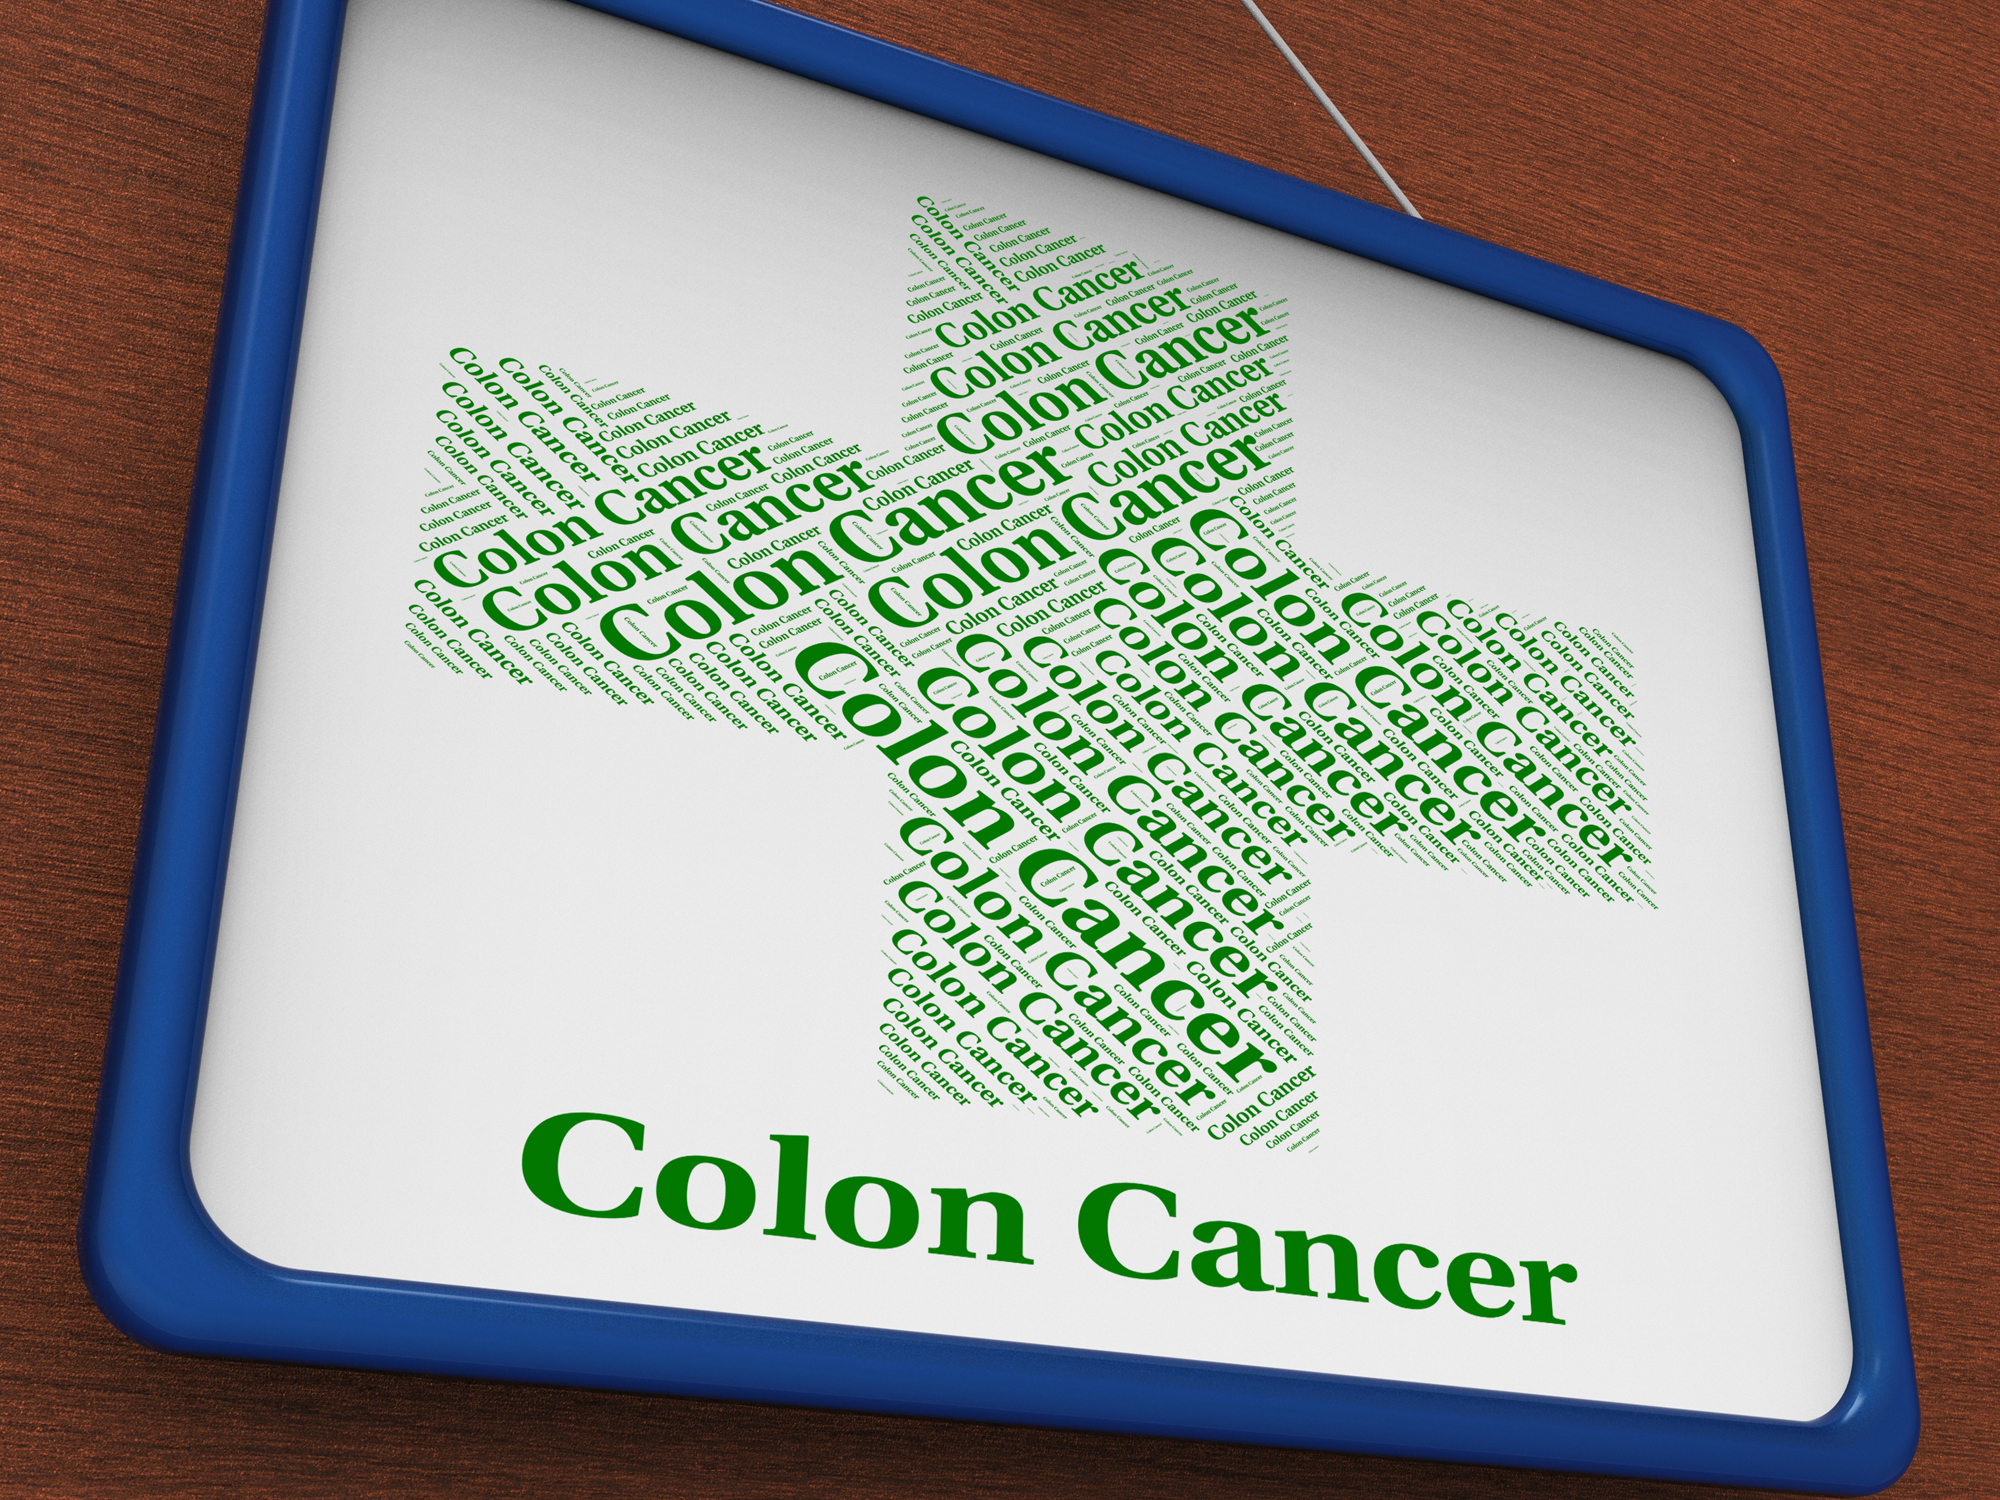 Two plant compounds leading the fight against colon cancer